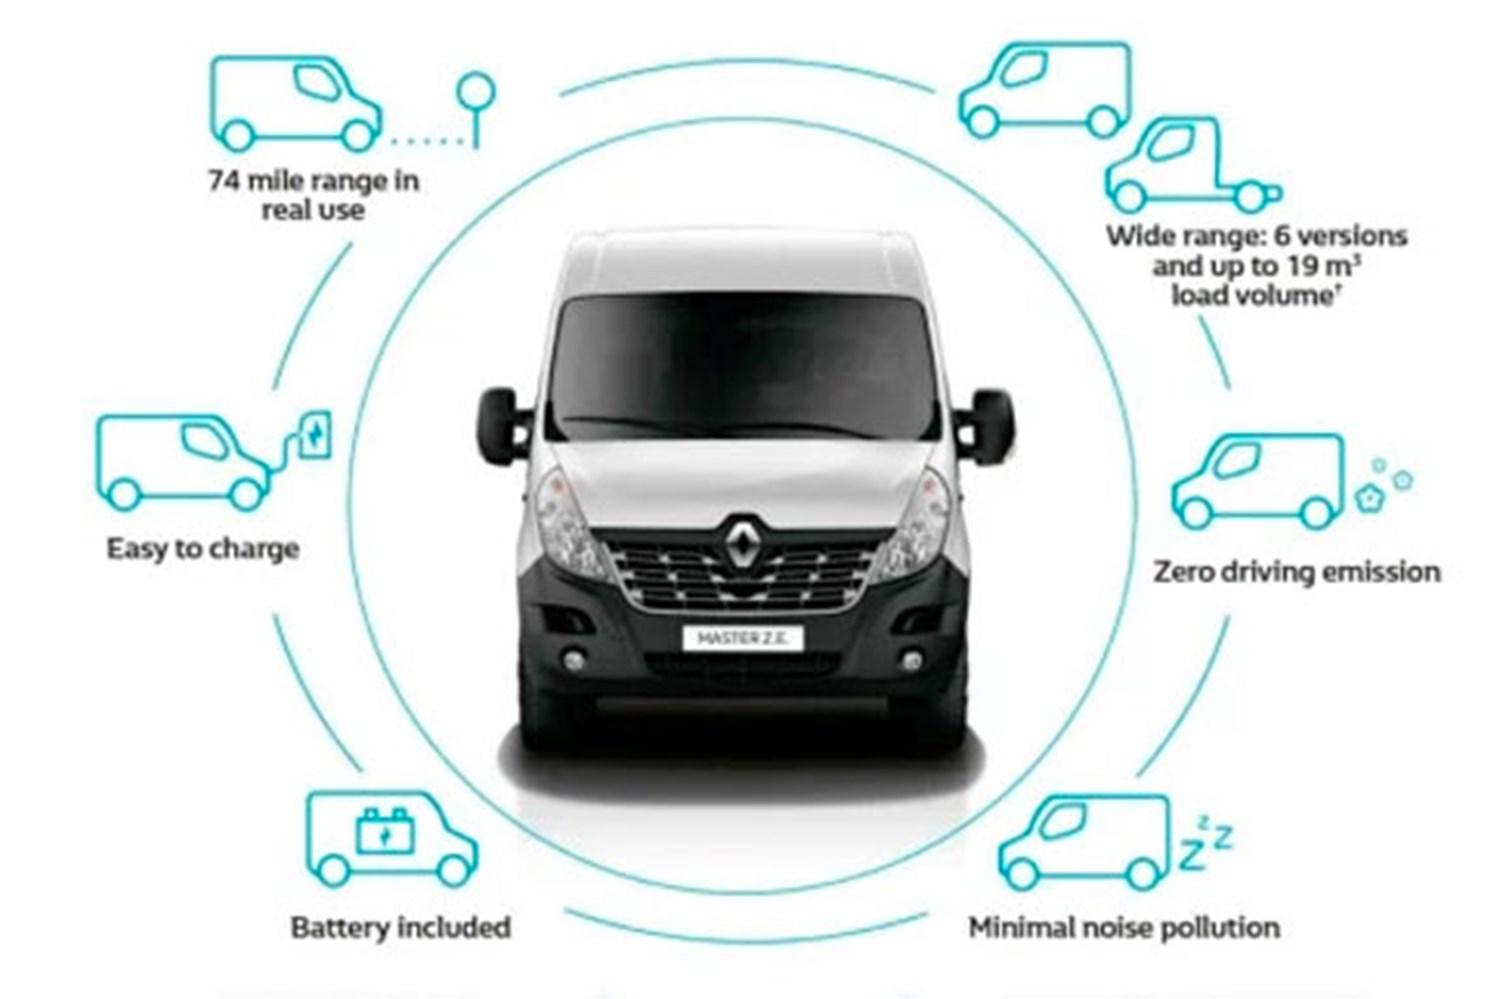 graphic of Renault Master ZE with facts